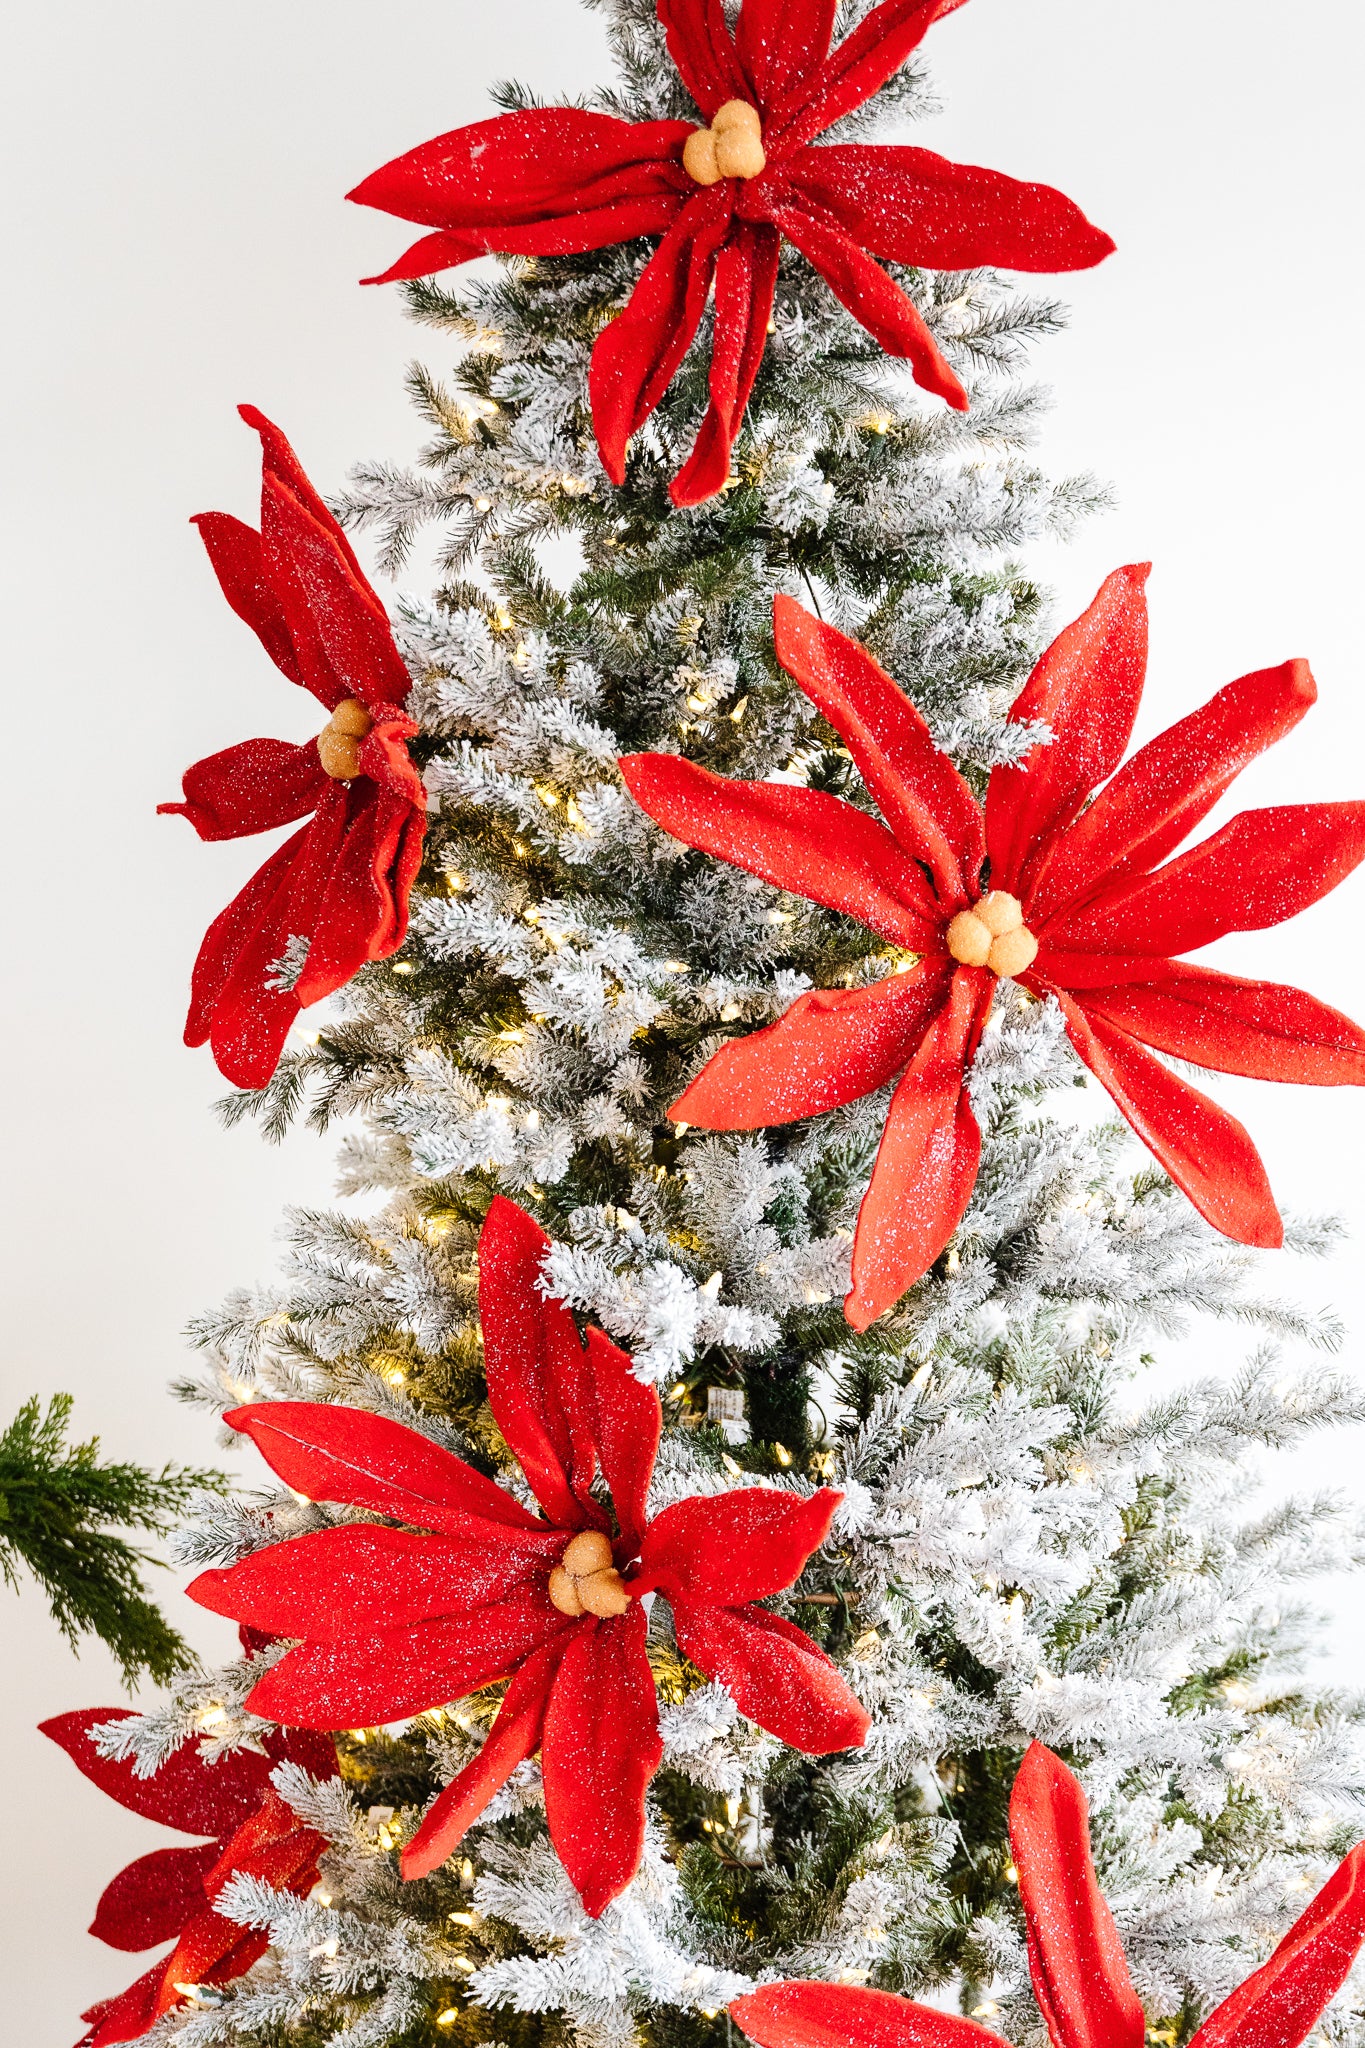 Red poinsetta tree decorations.